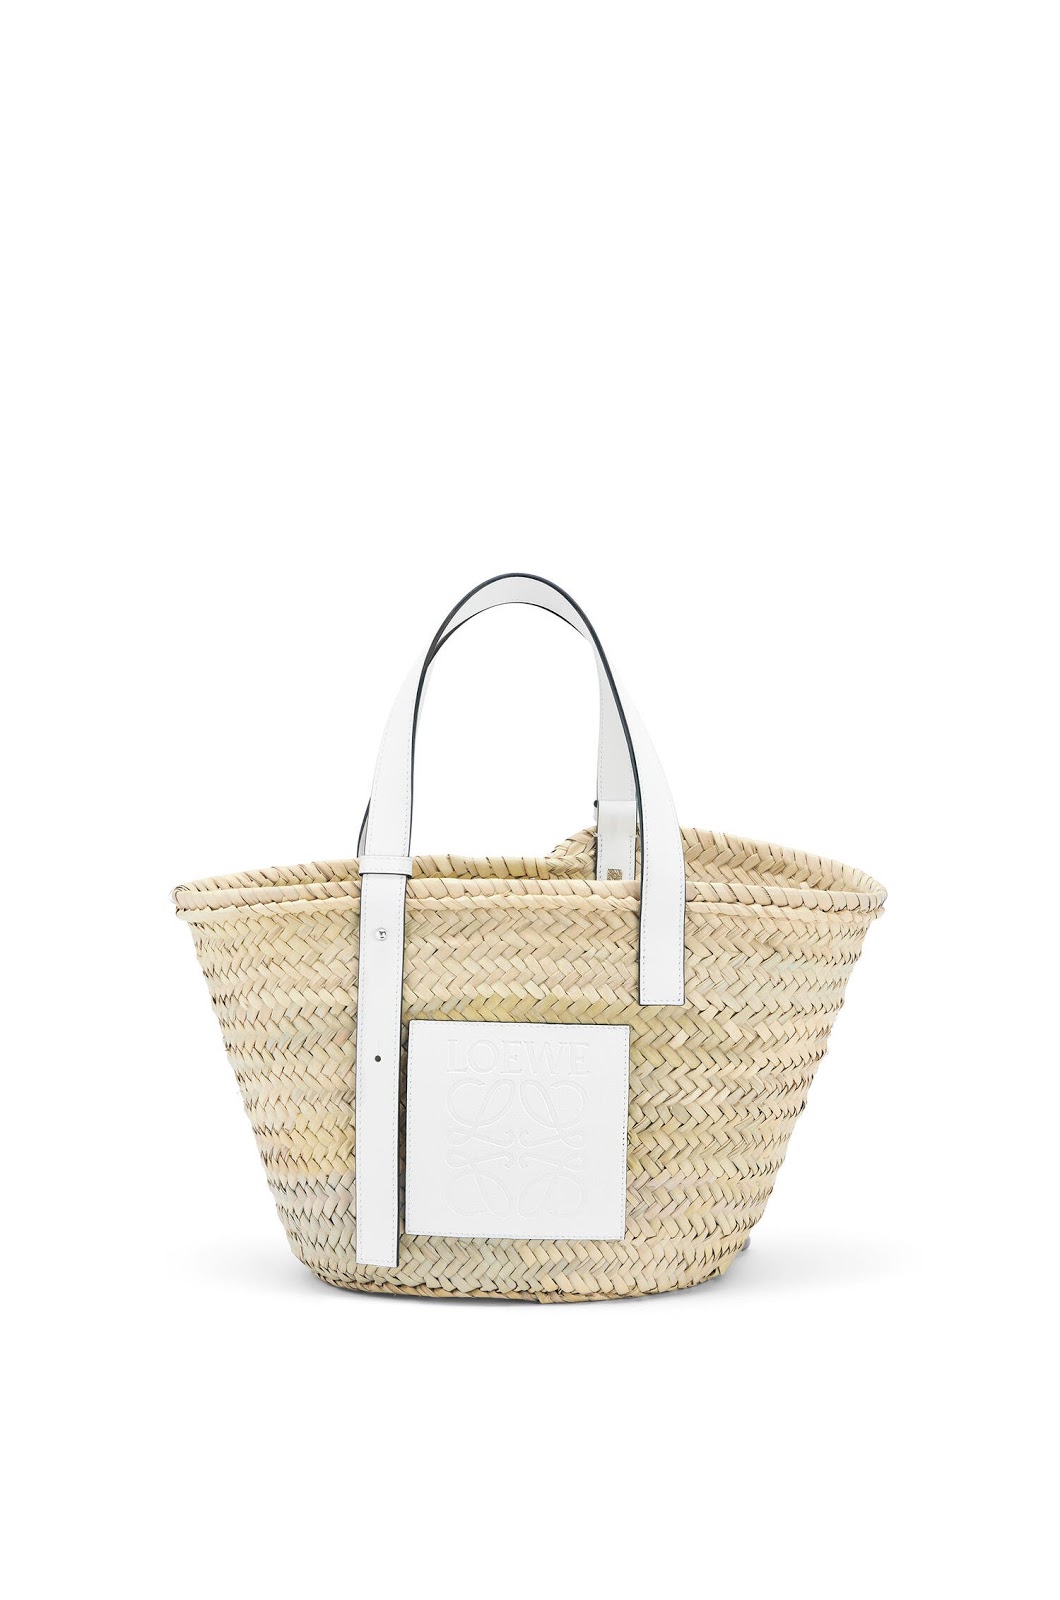 Style File | Mini Trend: Loewe’s Leather-Trimmed Woven Raffia Tote